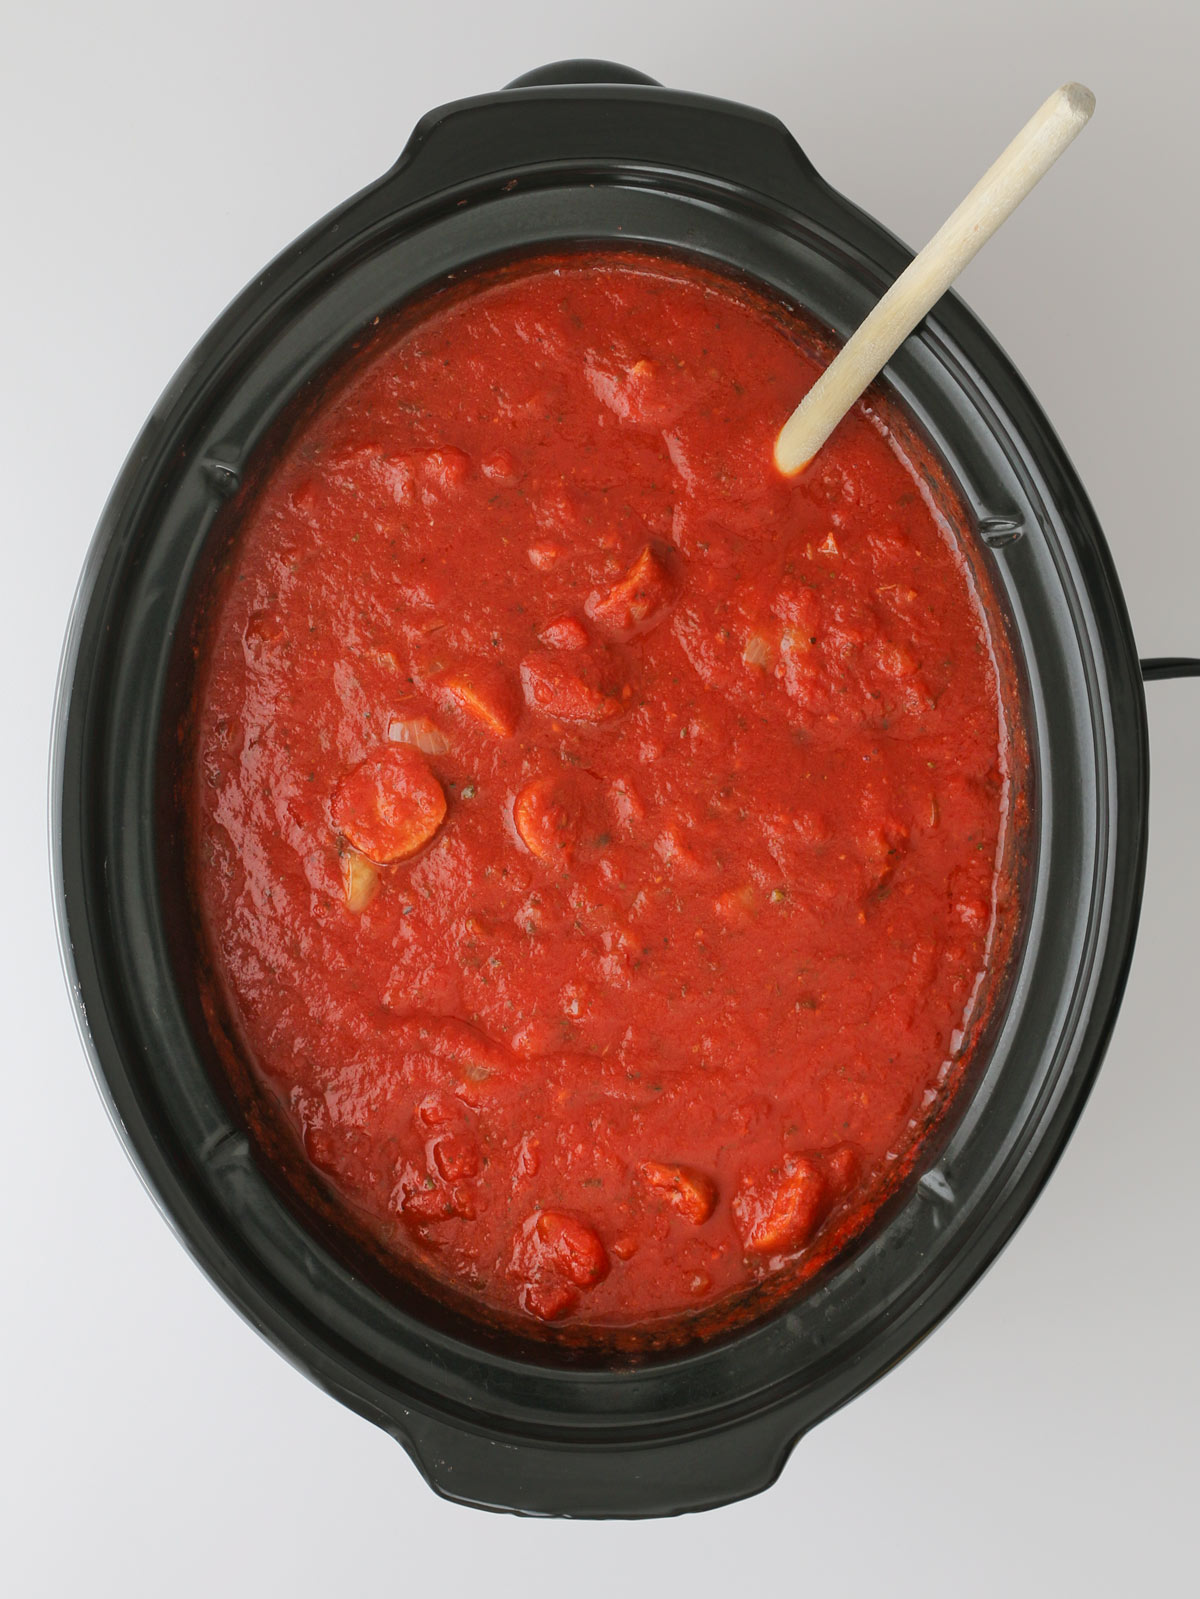 the completed sauce in the pot.